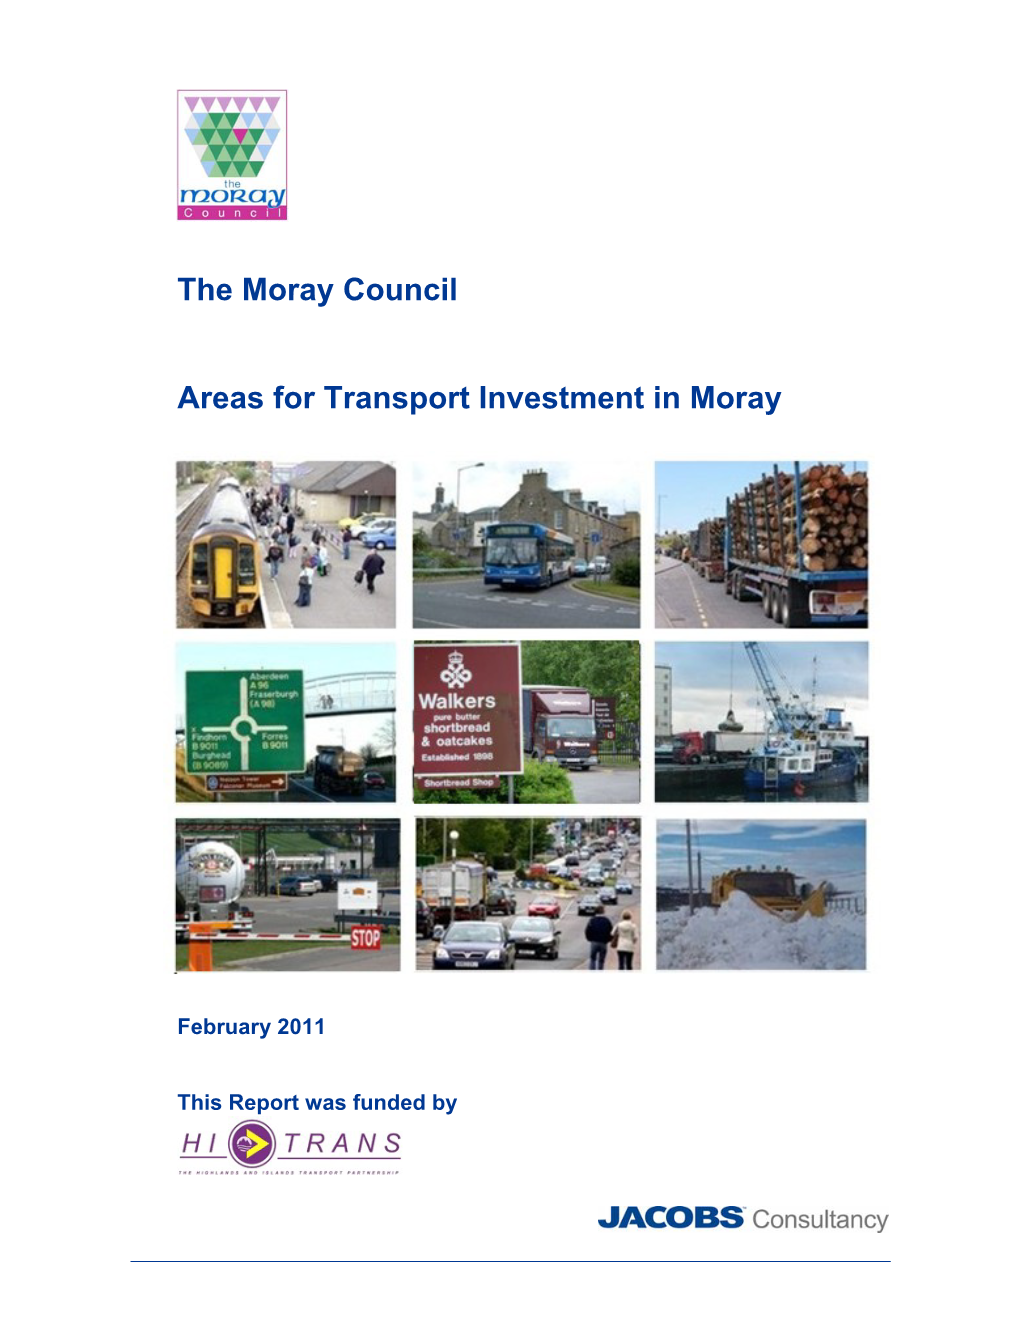 The Moray Council Areas for Transport Investment In